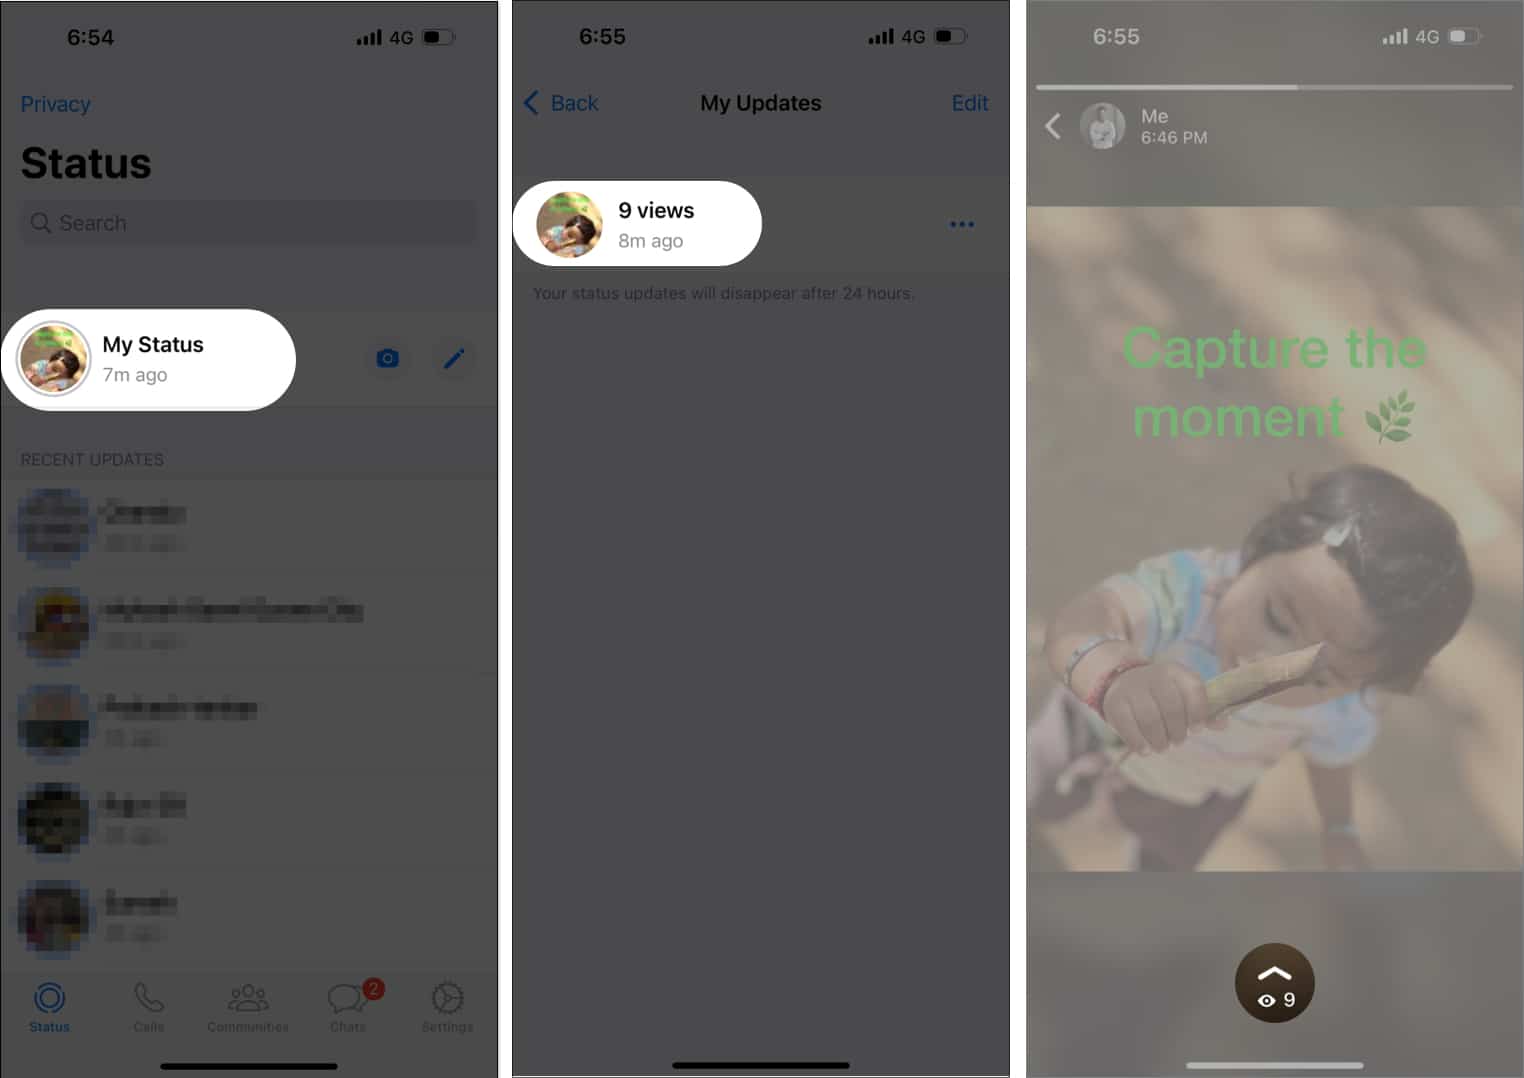 Find out views of your status on WhatsApp from iPhone